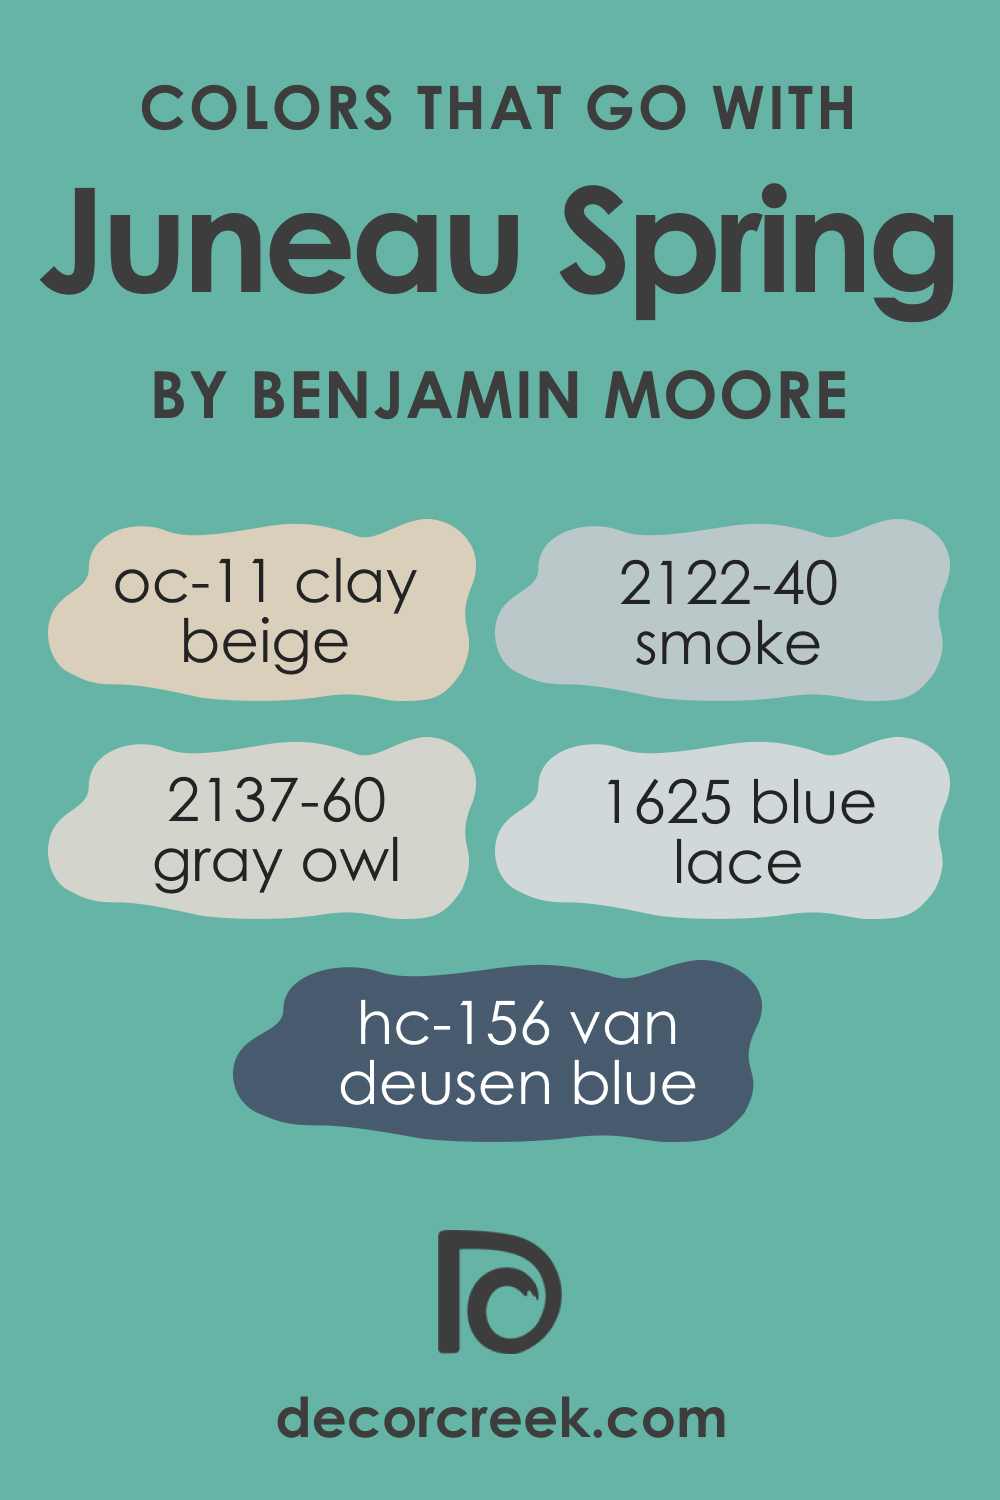 Colors That Go With Juneau Spring 2041-40